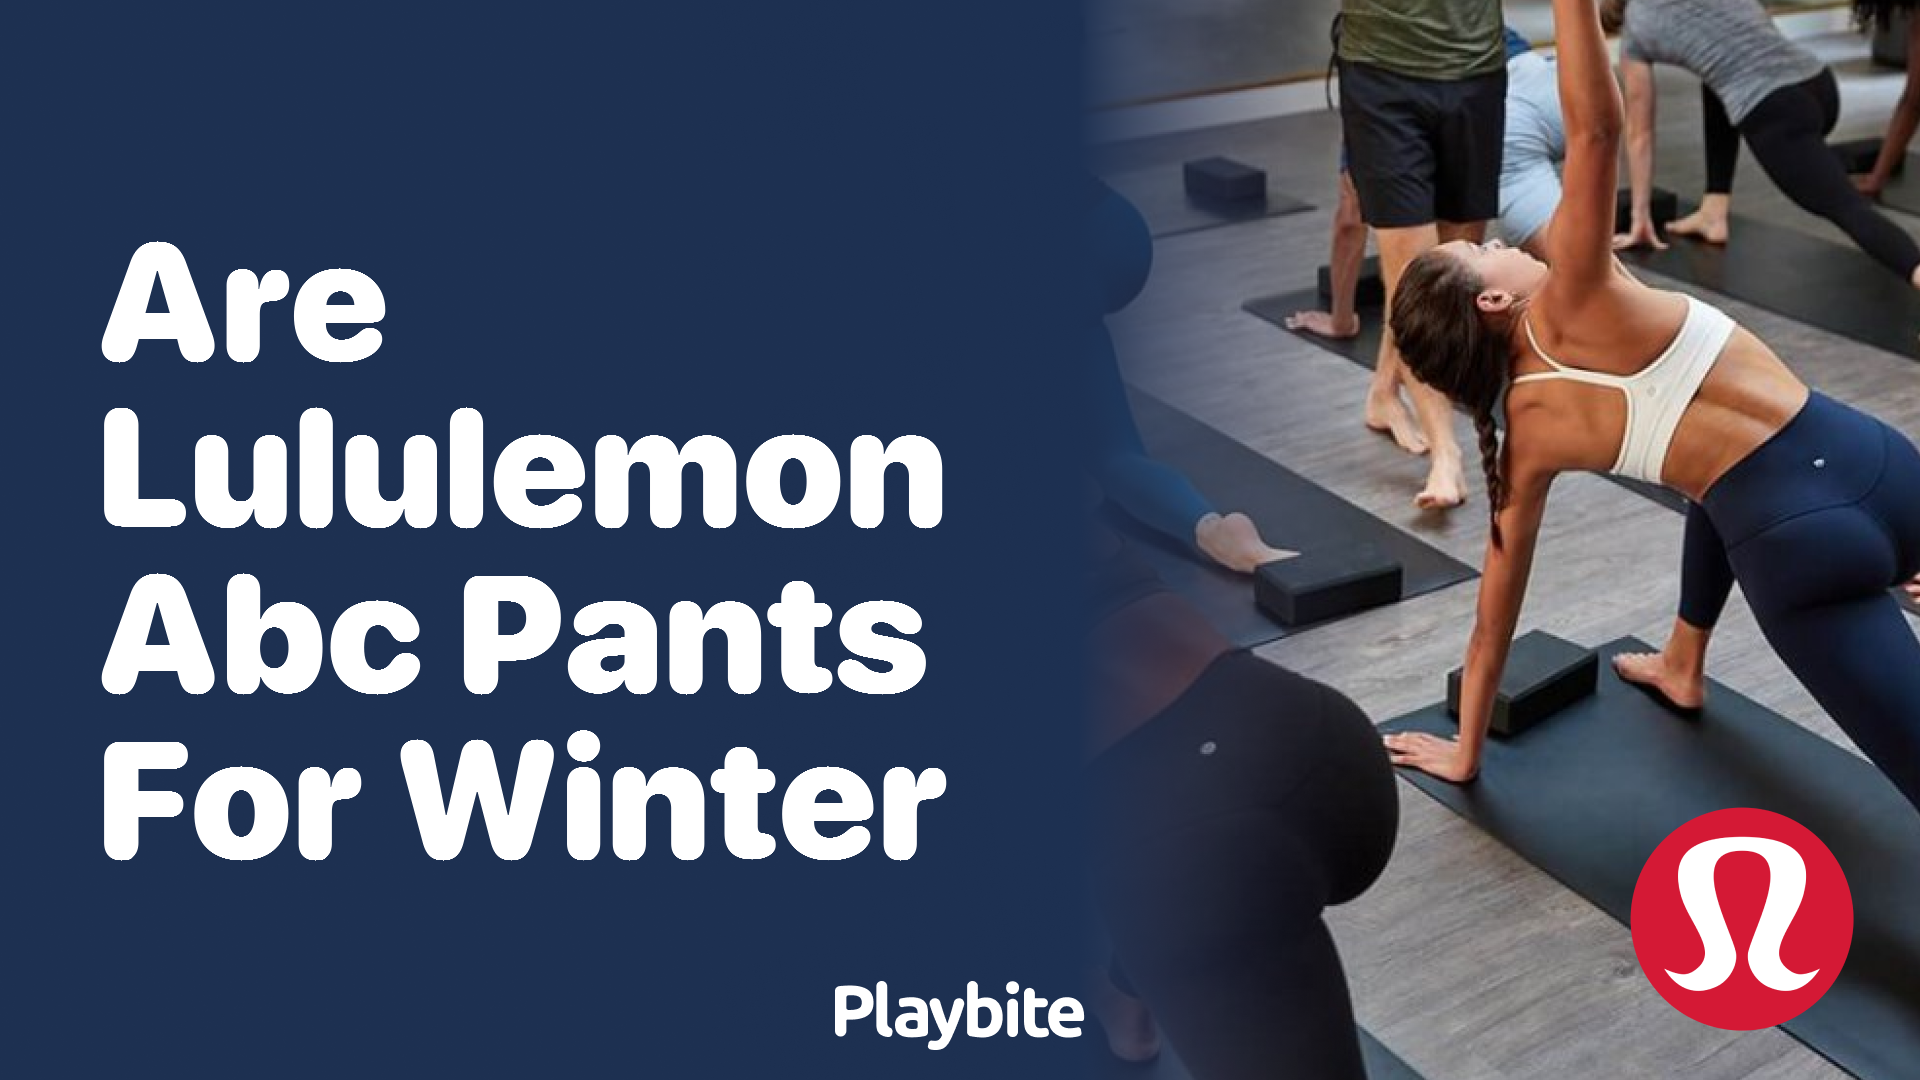 Are Lululemon ABC Pants Suitable for Winter? - Playbite